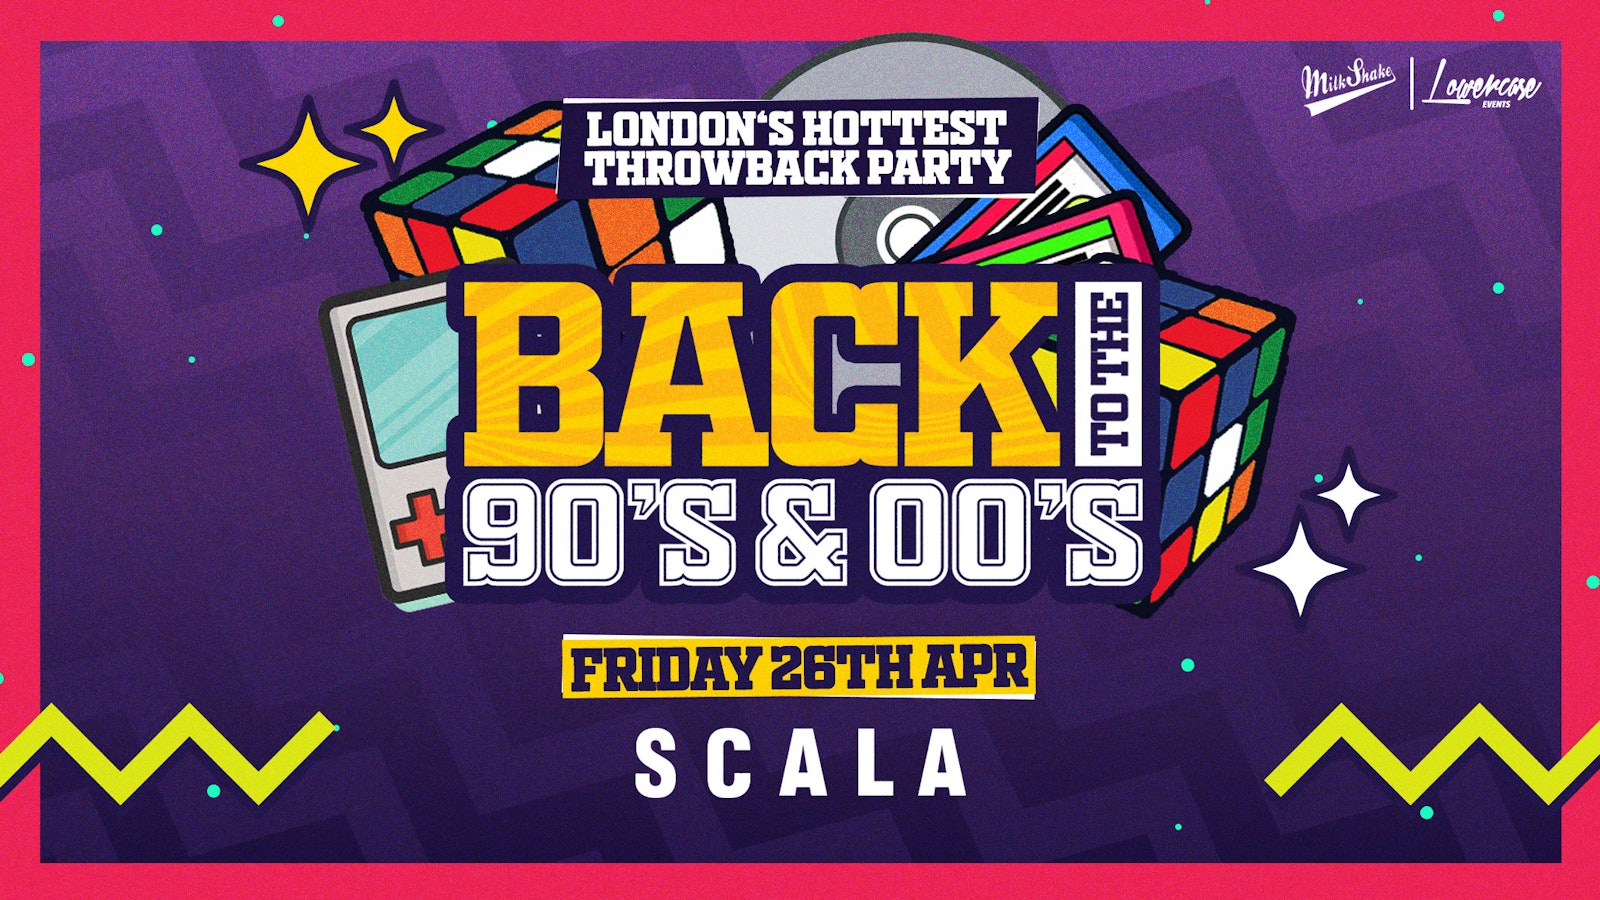 TONIGHT 10PM! – Back To The 90’s & 00’s – London’s ORIGINAL Throwback Session at Scala